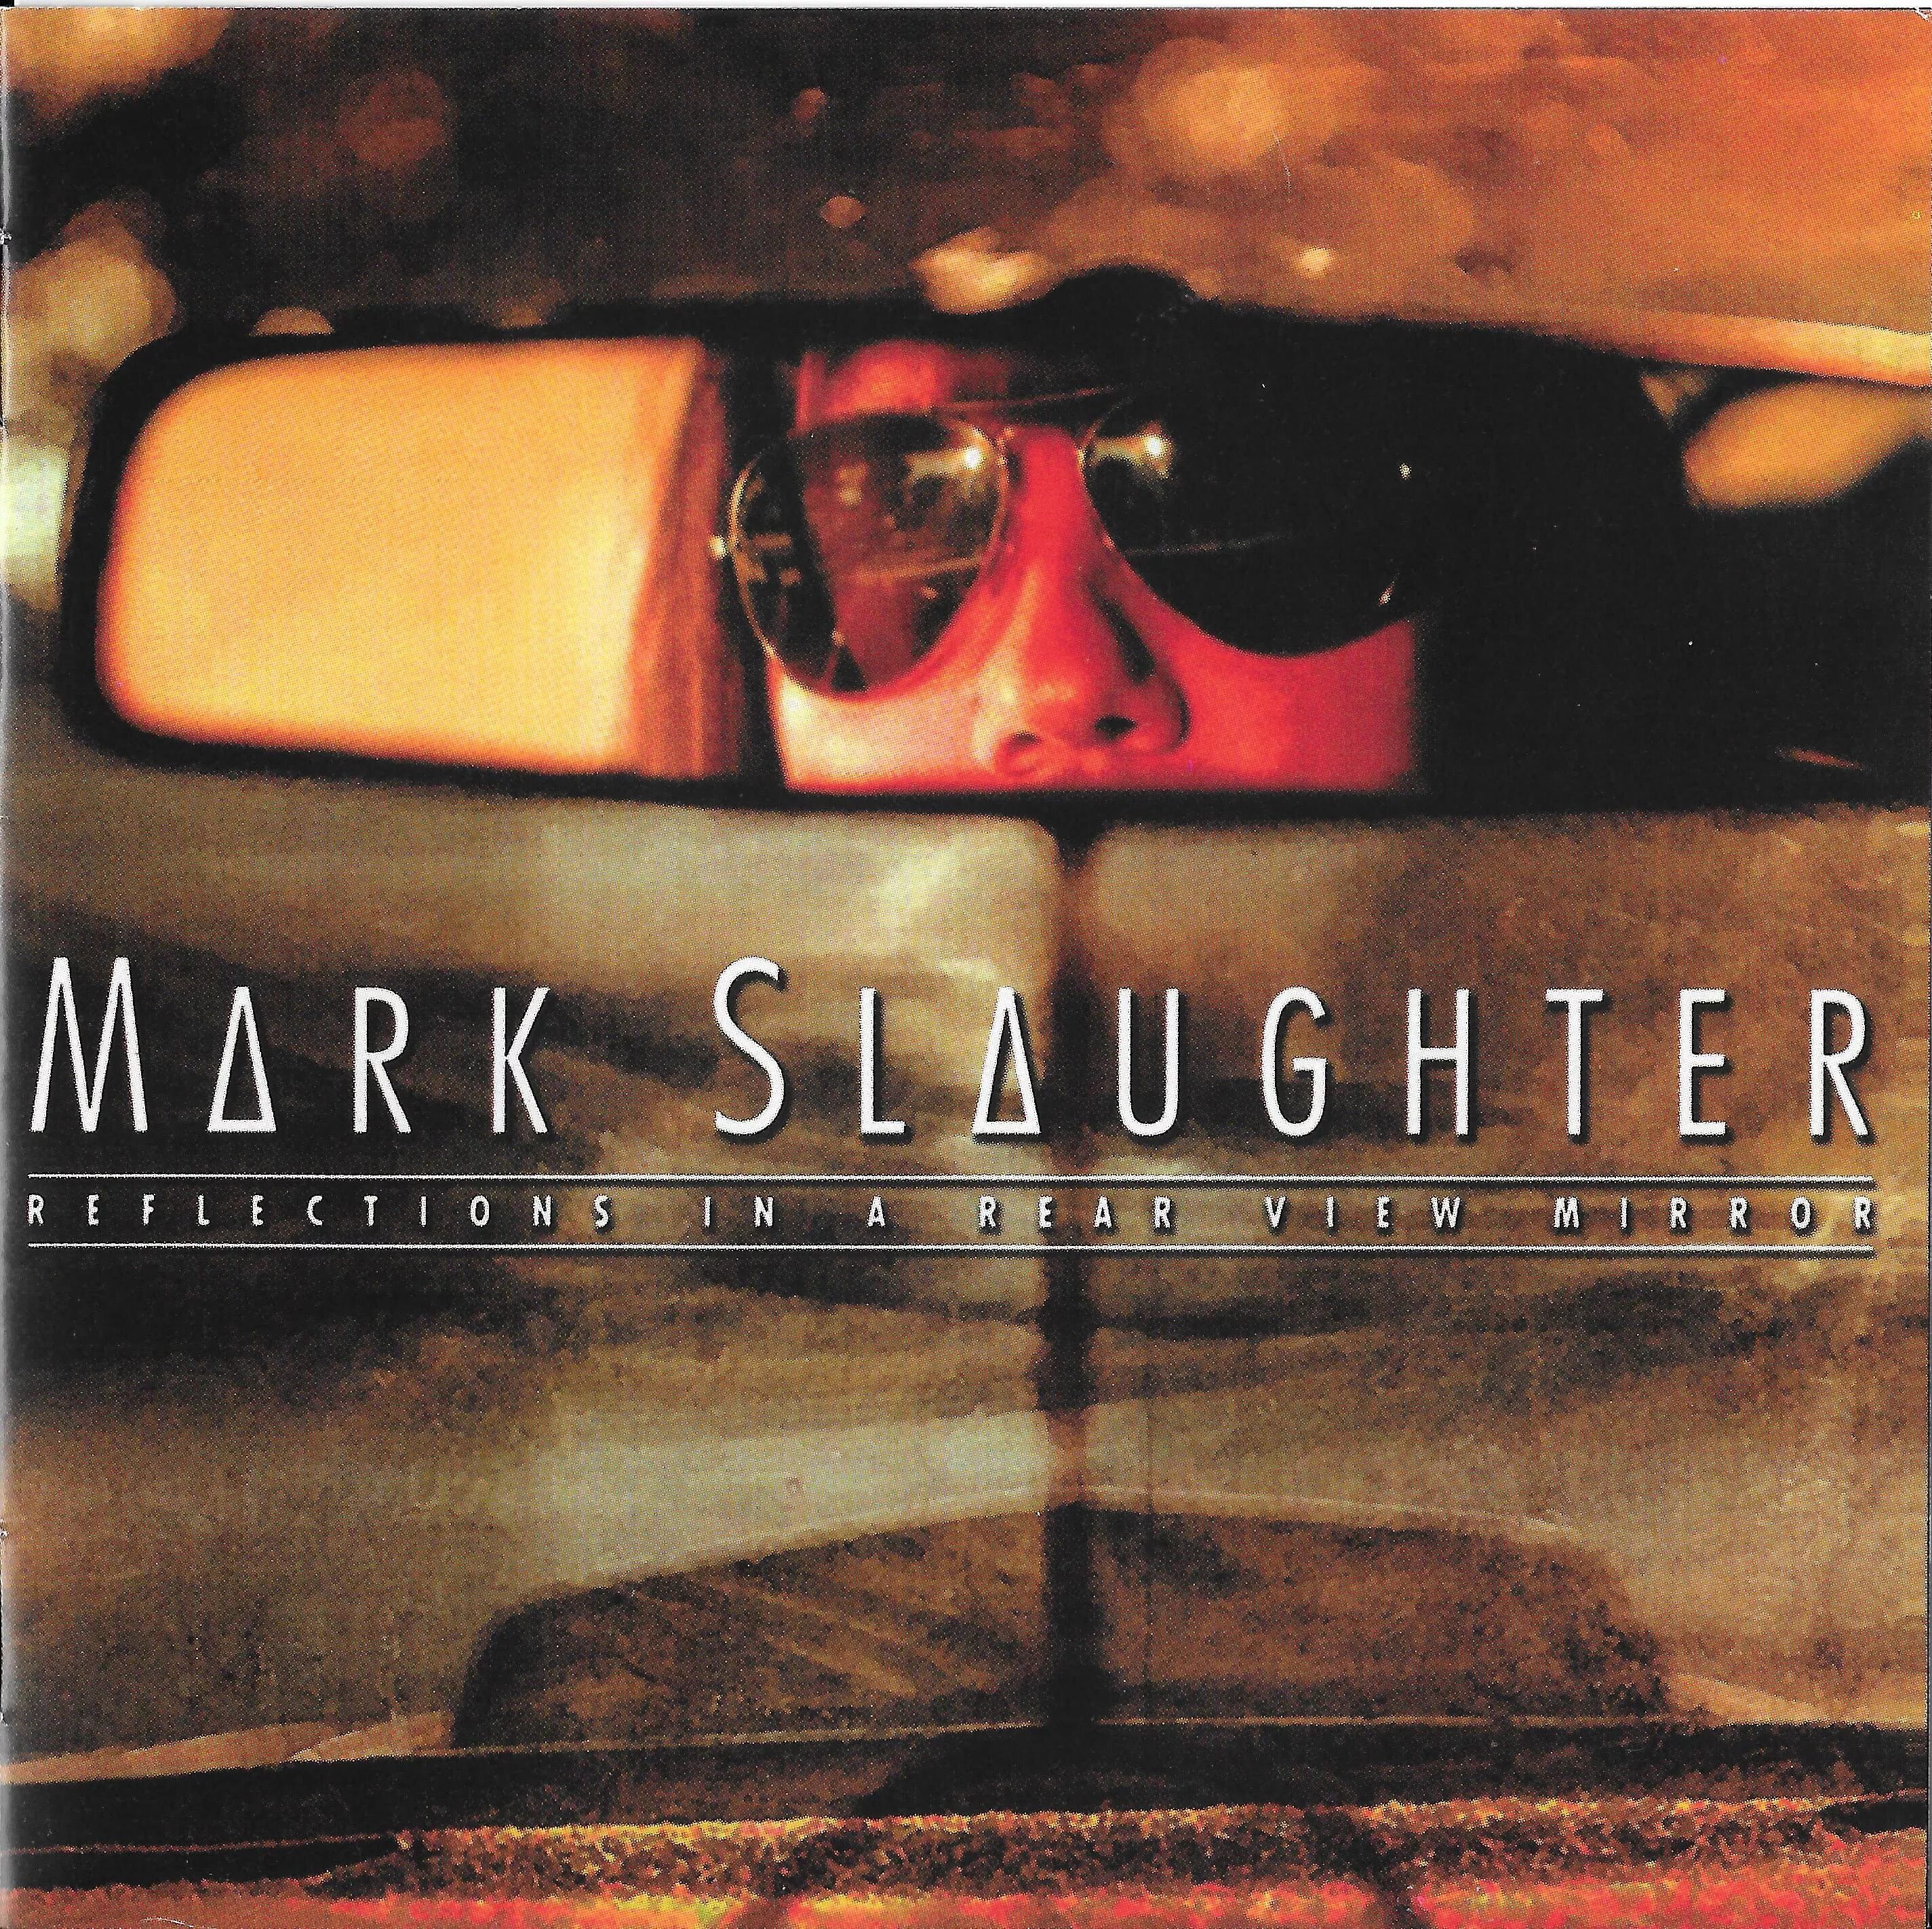 Flac 2015. Mark Slaughter - reflections in a Rear view Mirror (Japanese Edition). Обложки альбомов Rearview Spears.